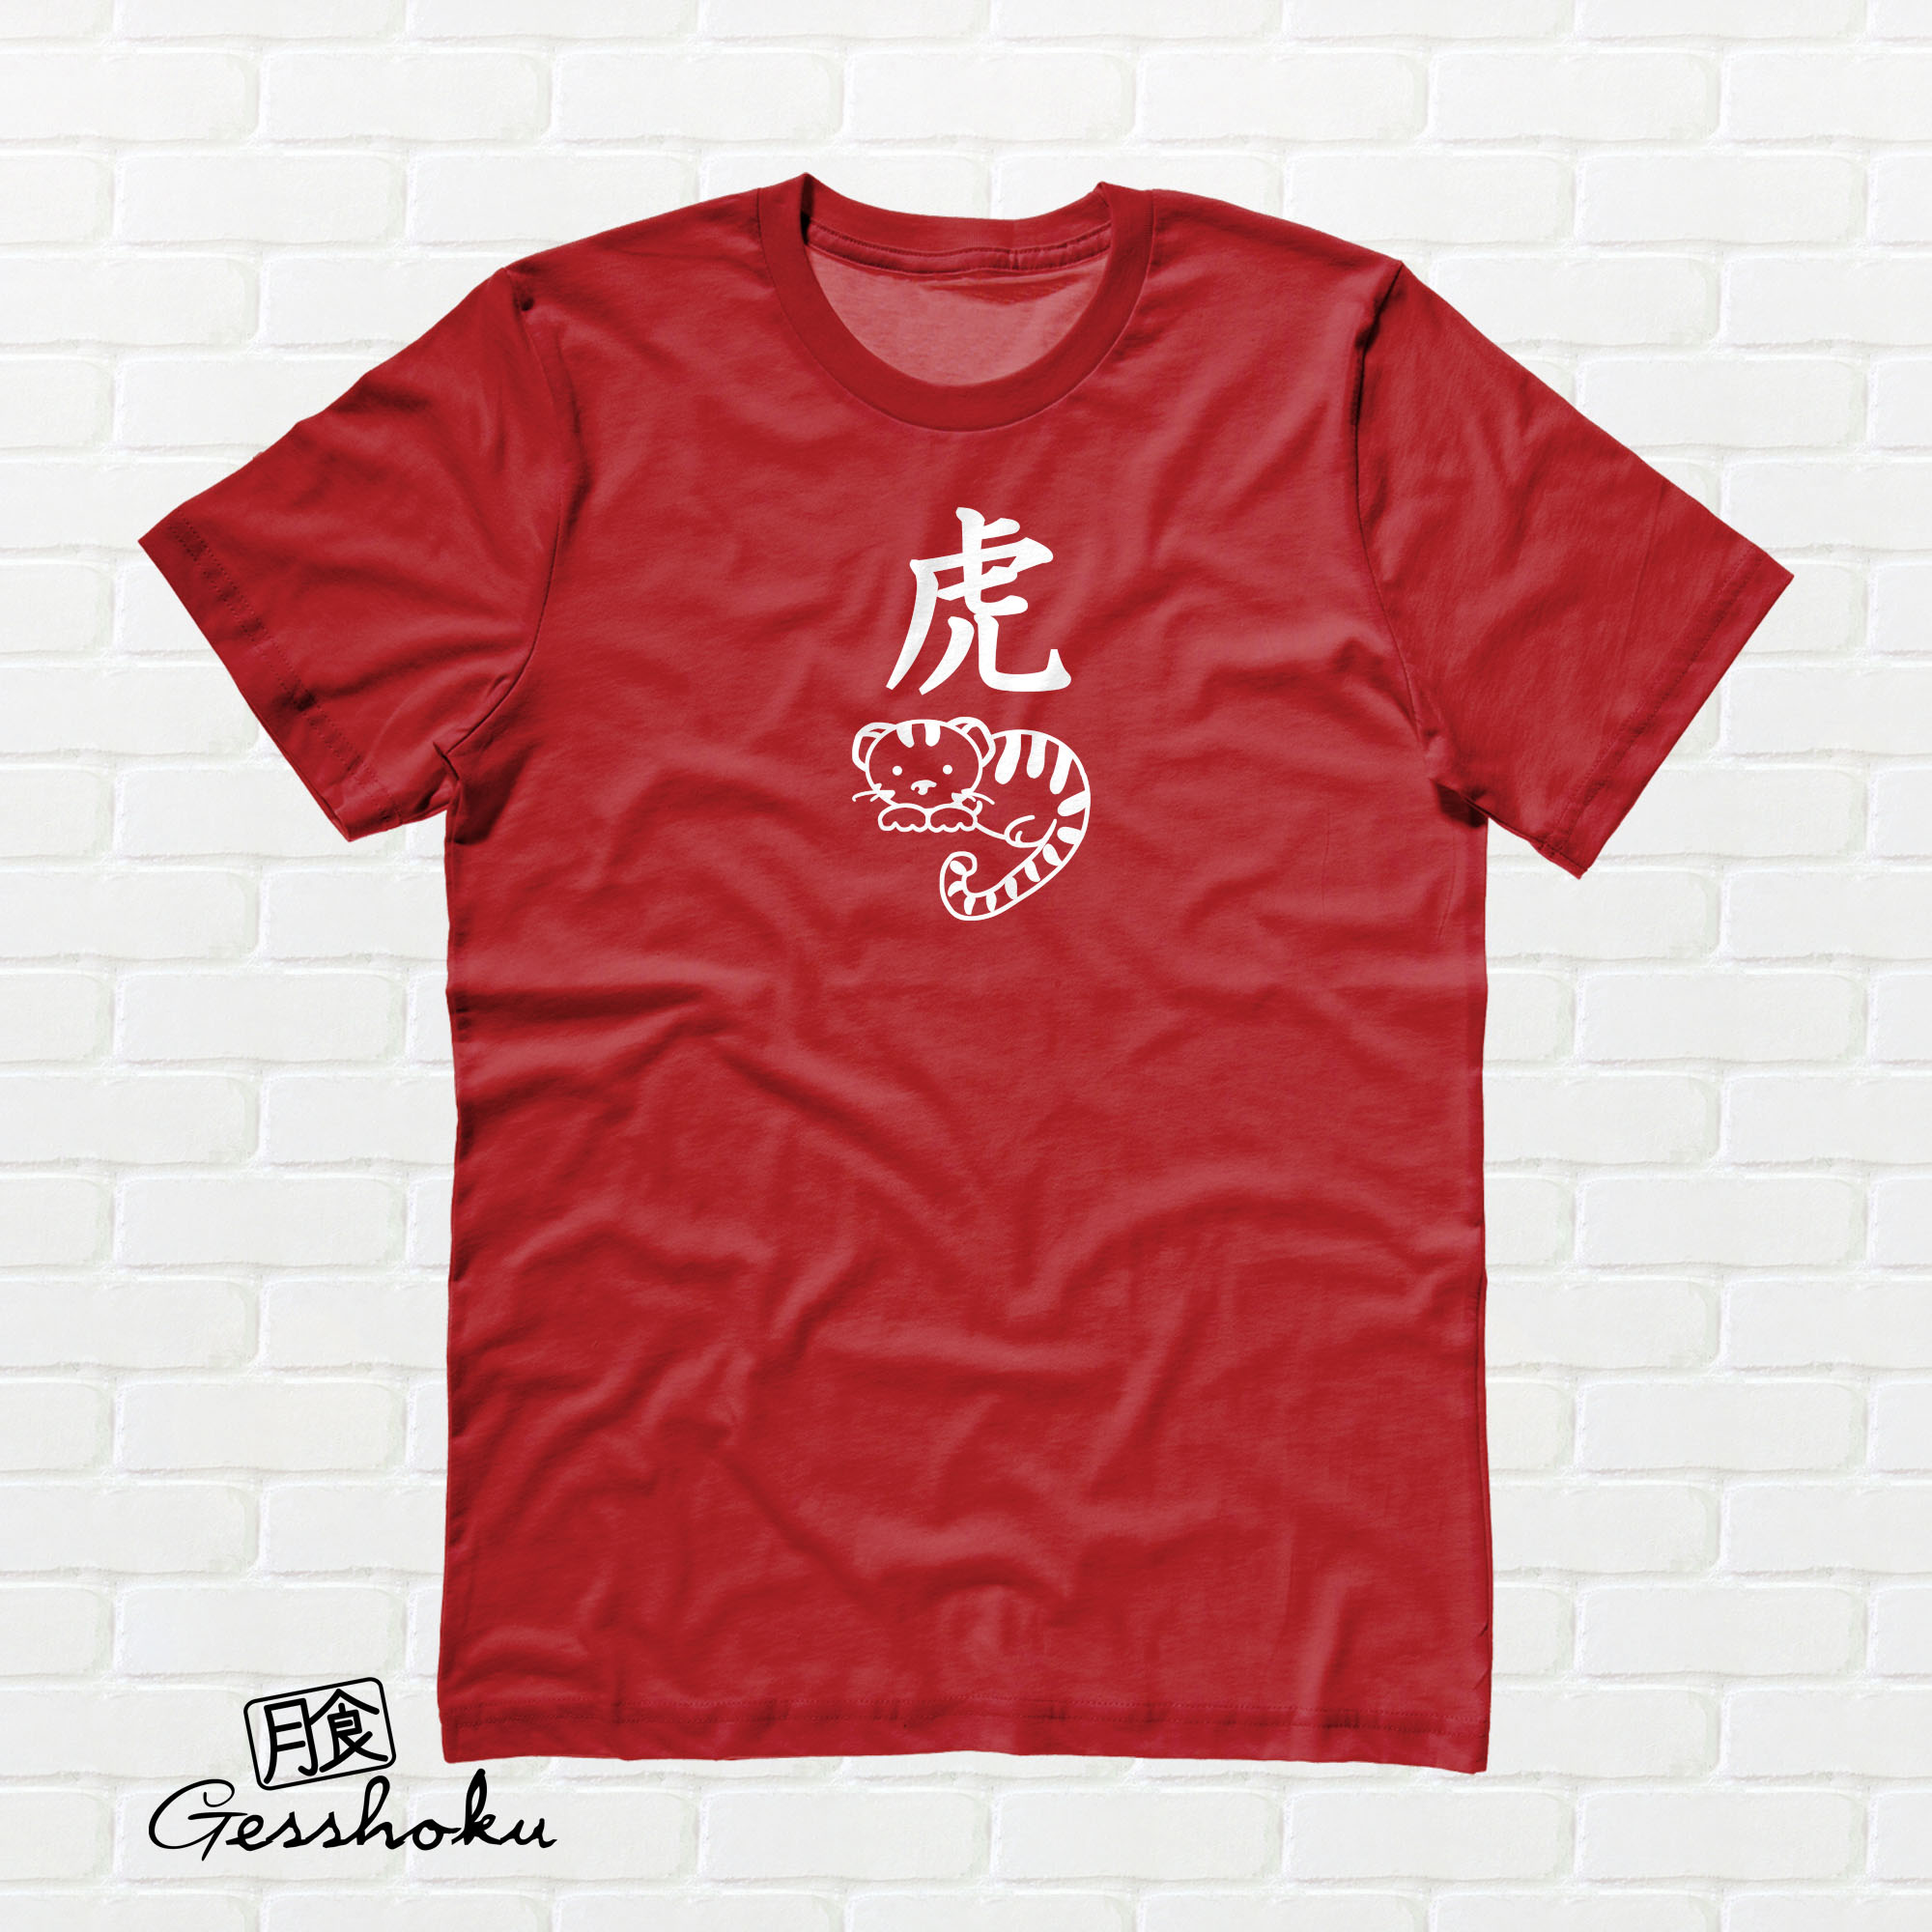 Year of the Tiger Chinese Zodiac T-shirt - Red